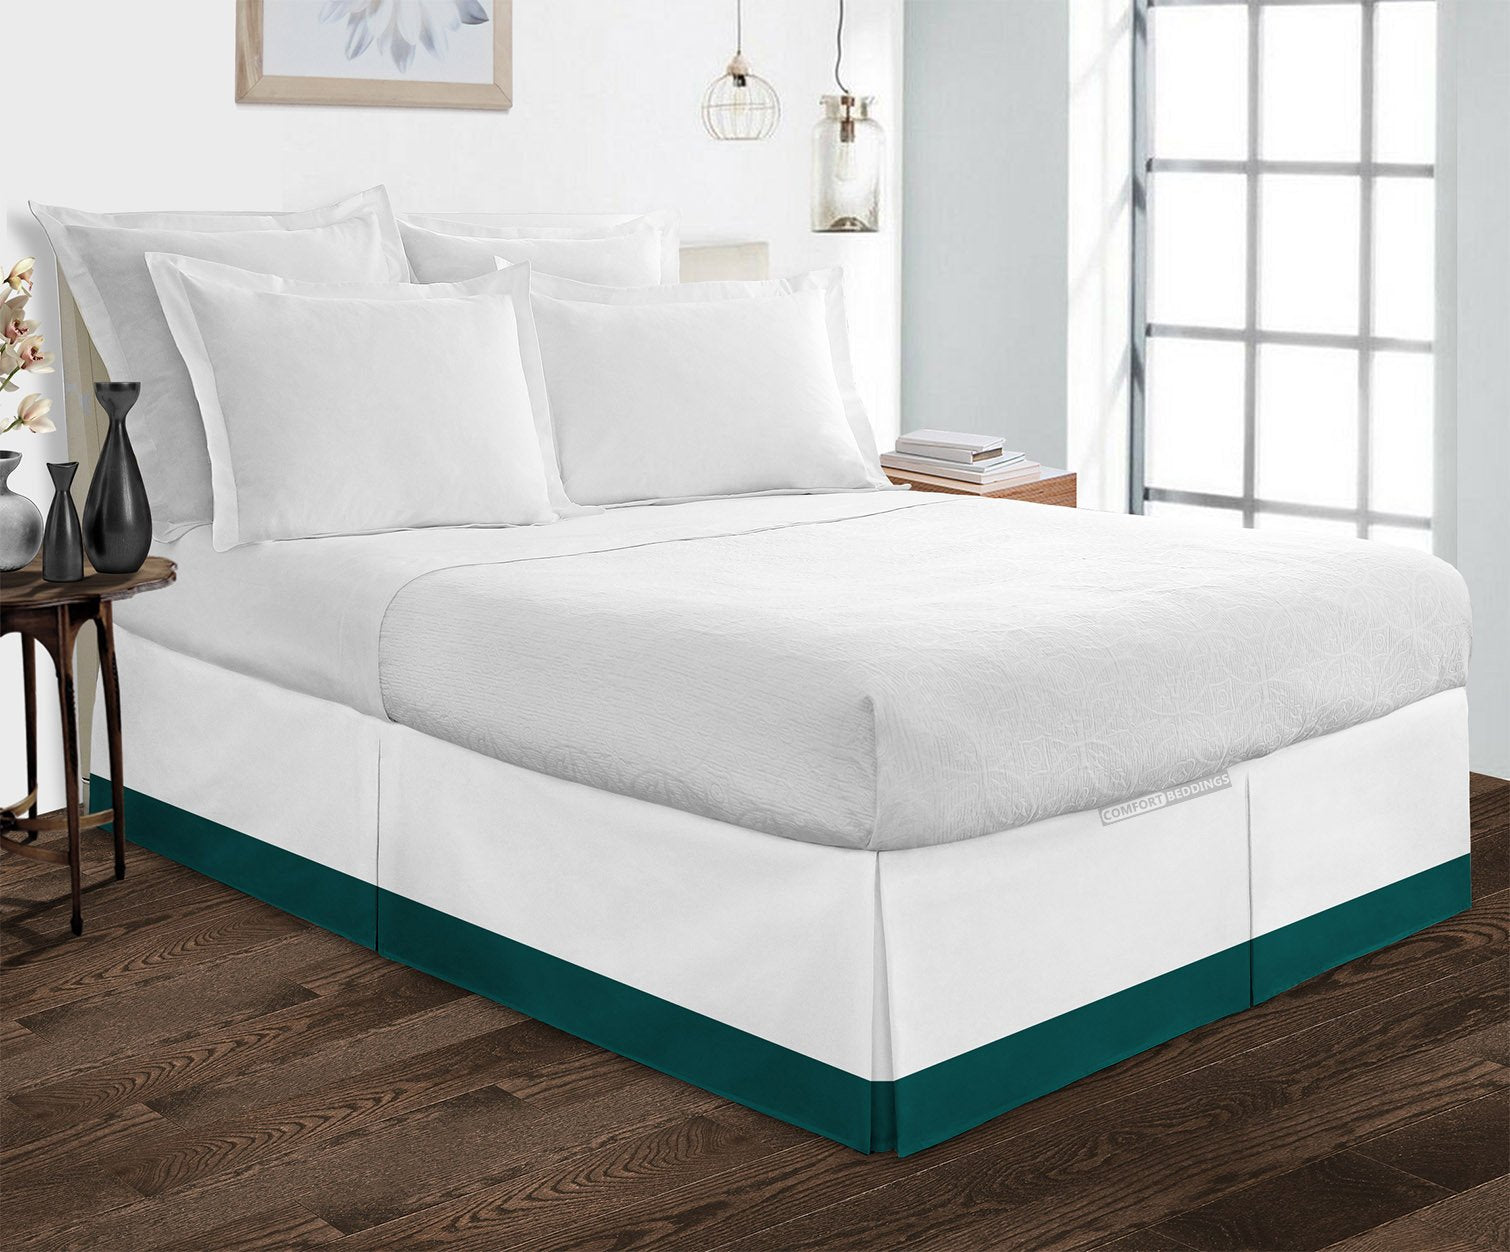 Luxury Teal Two Tone Bed Skirt